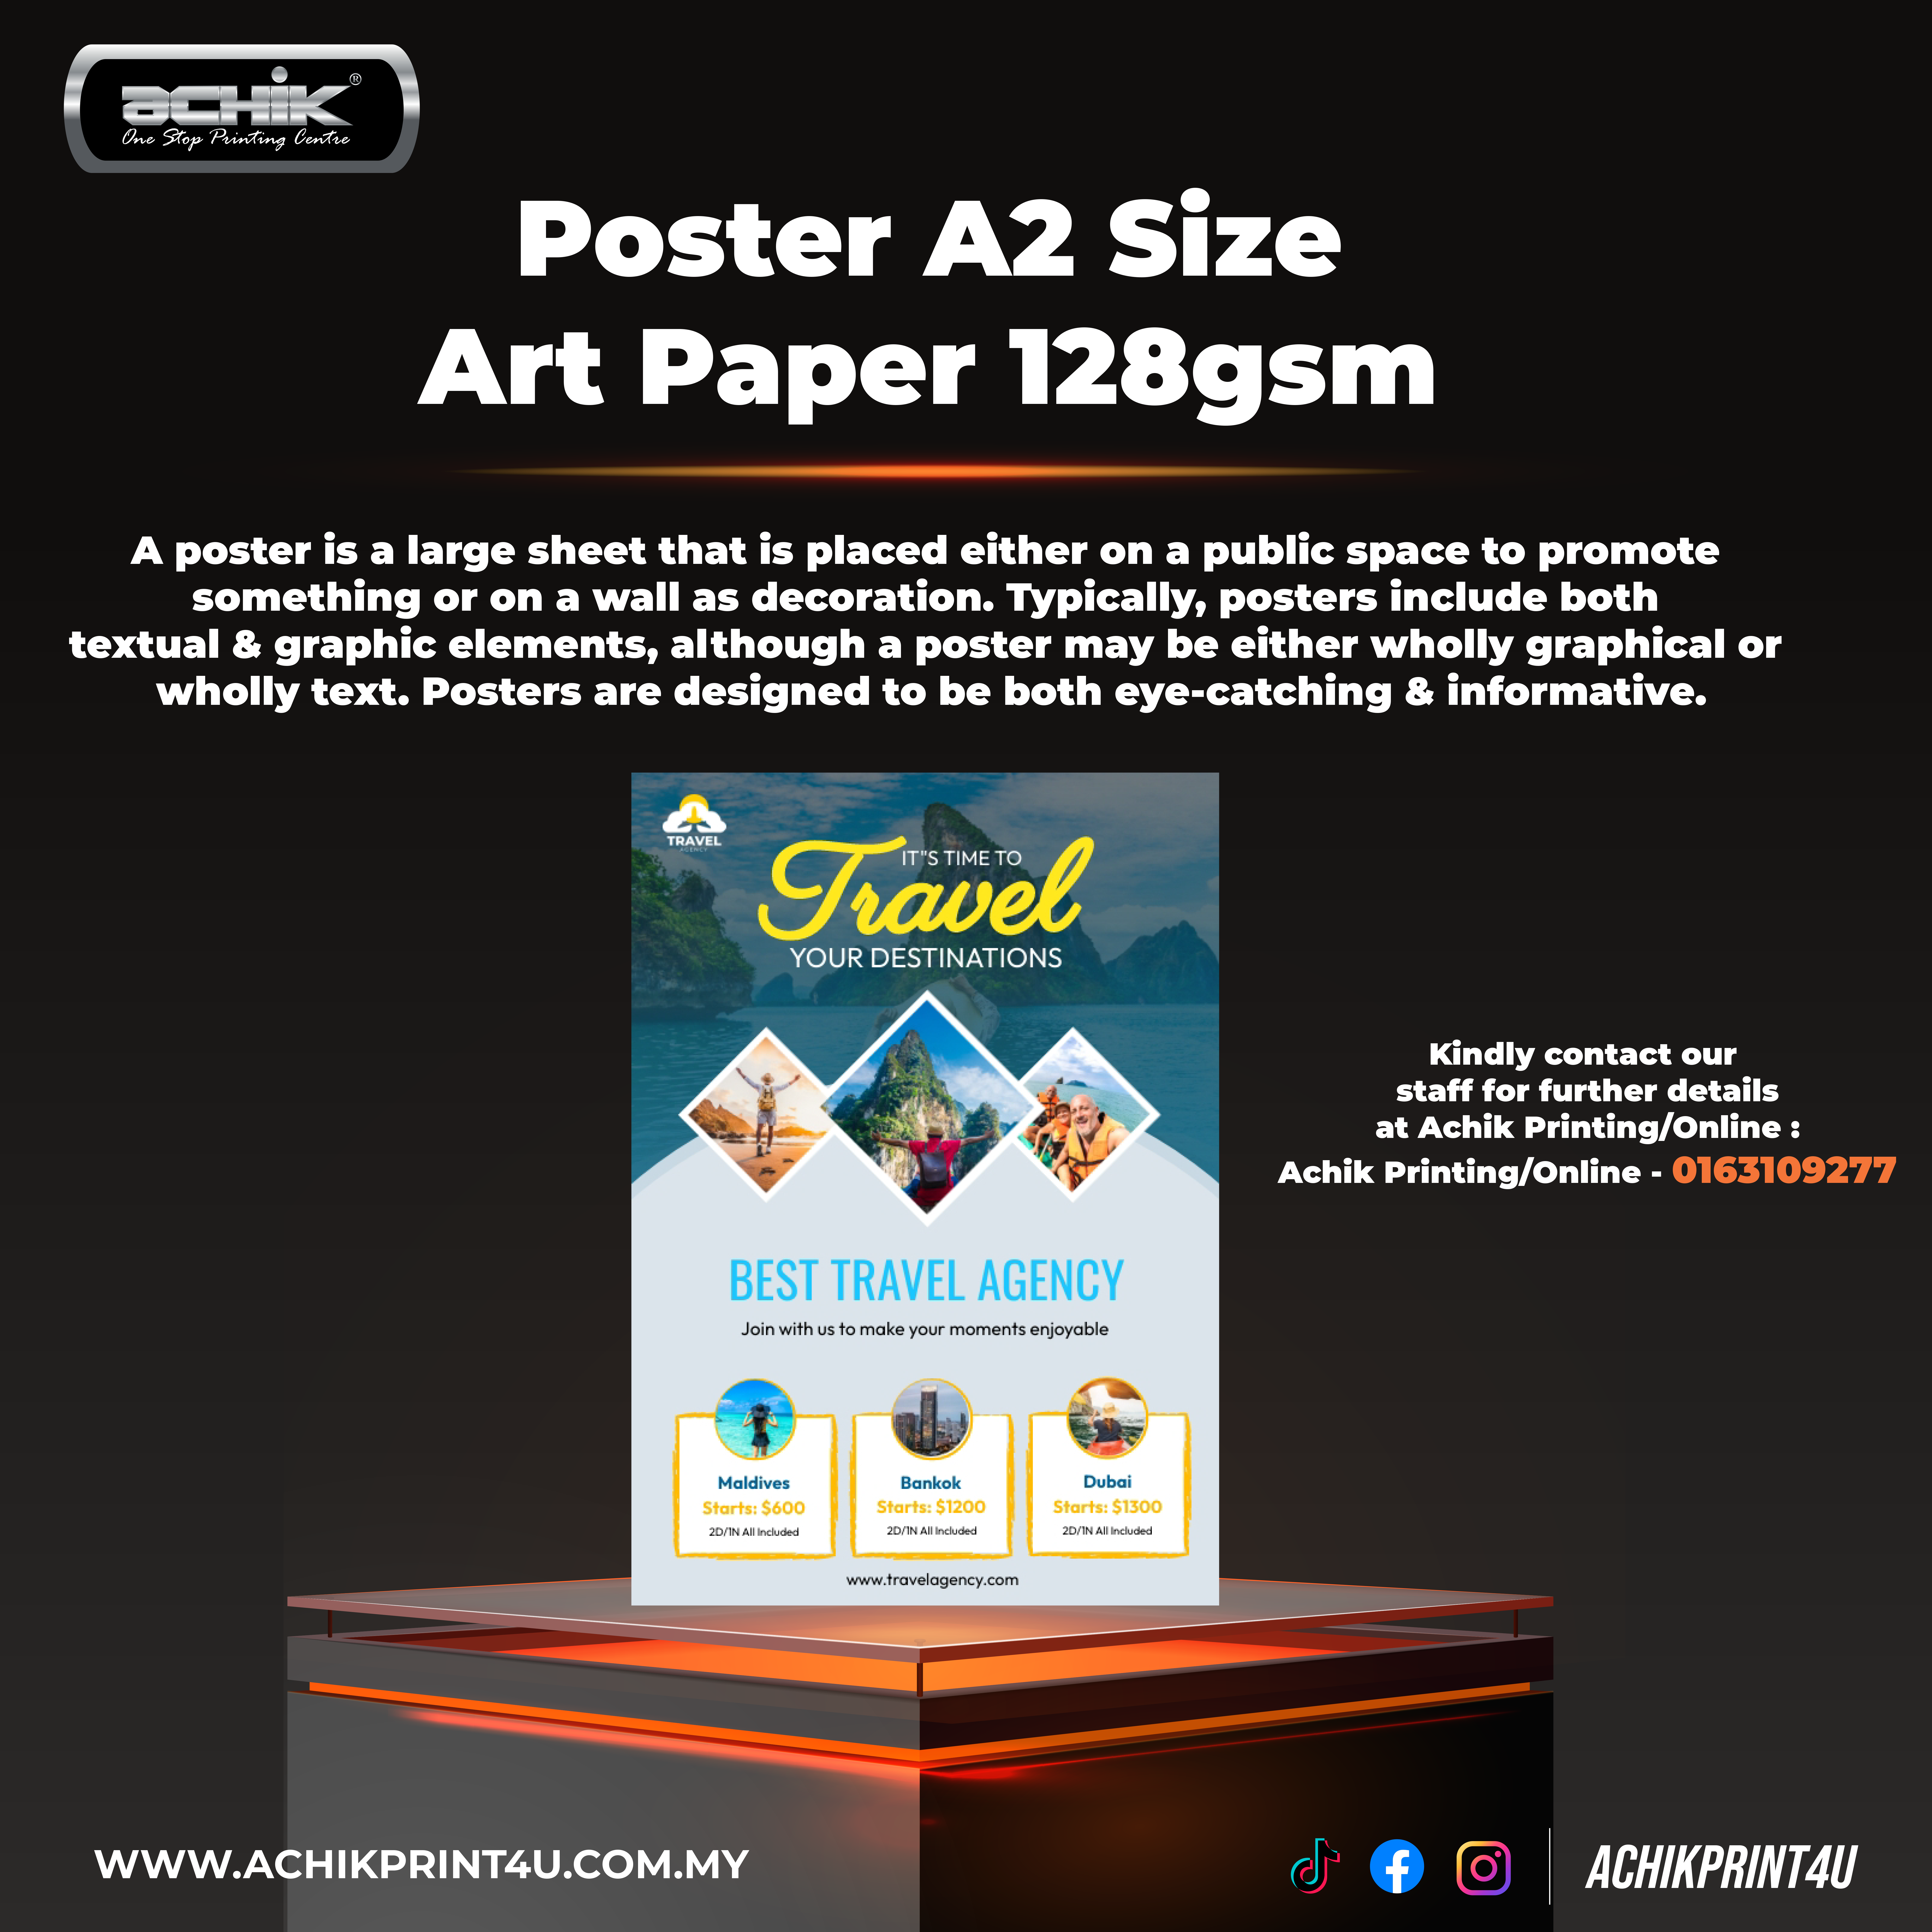 Poster A2 Size - Art Paper 128gsm